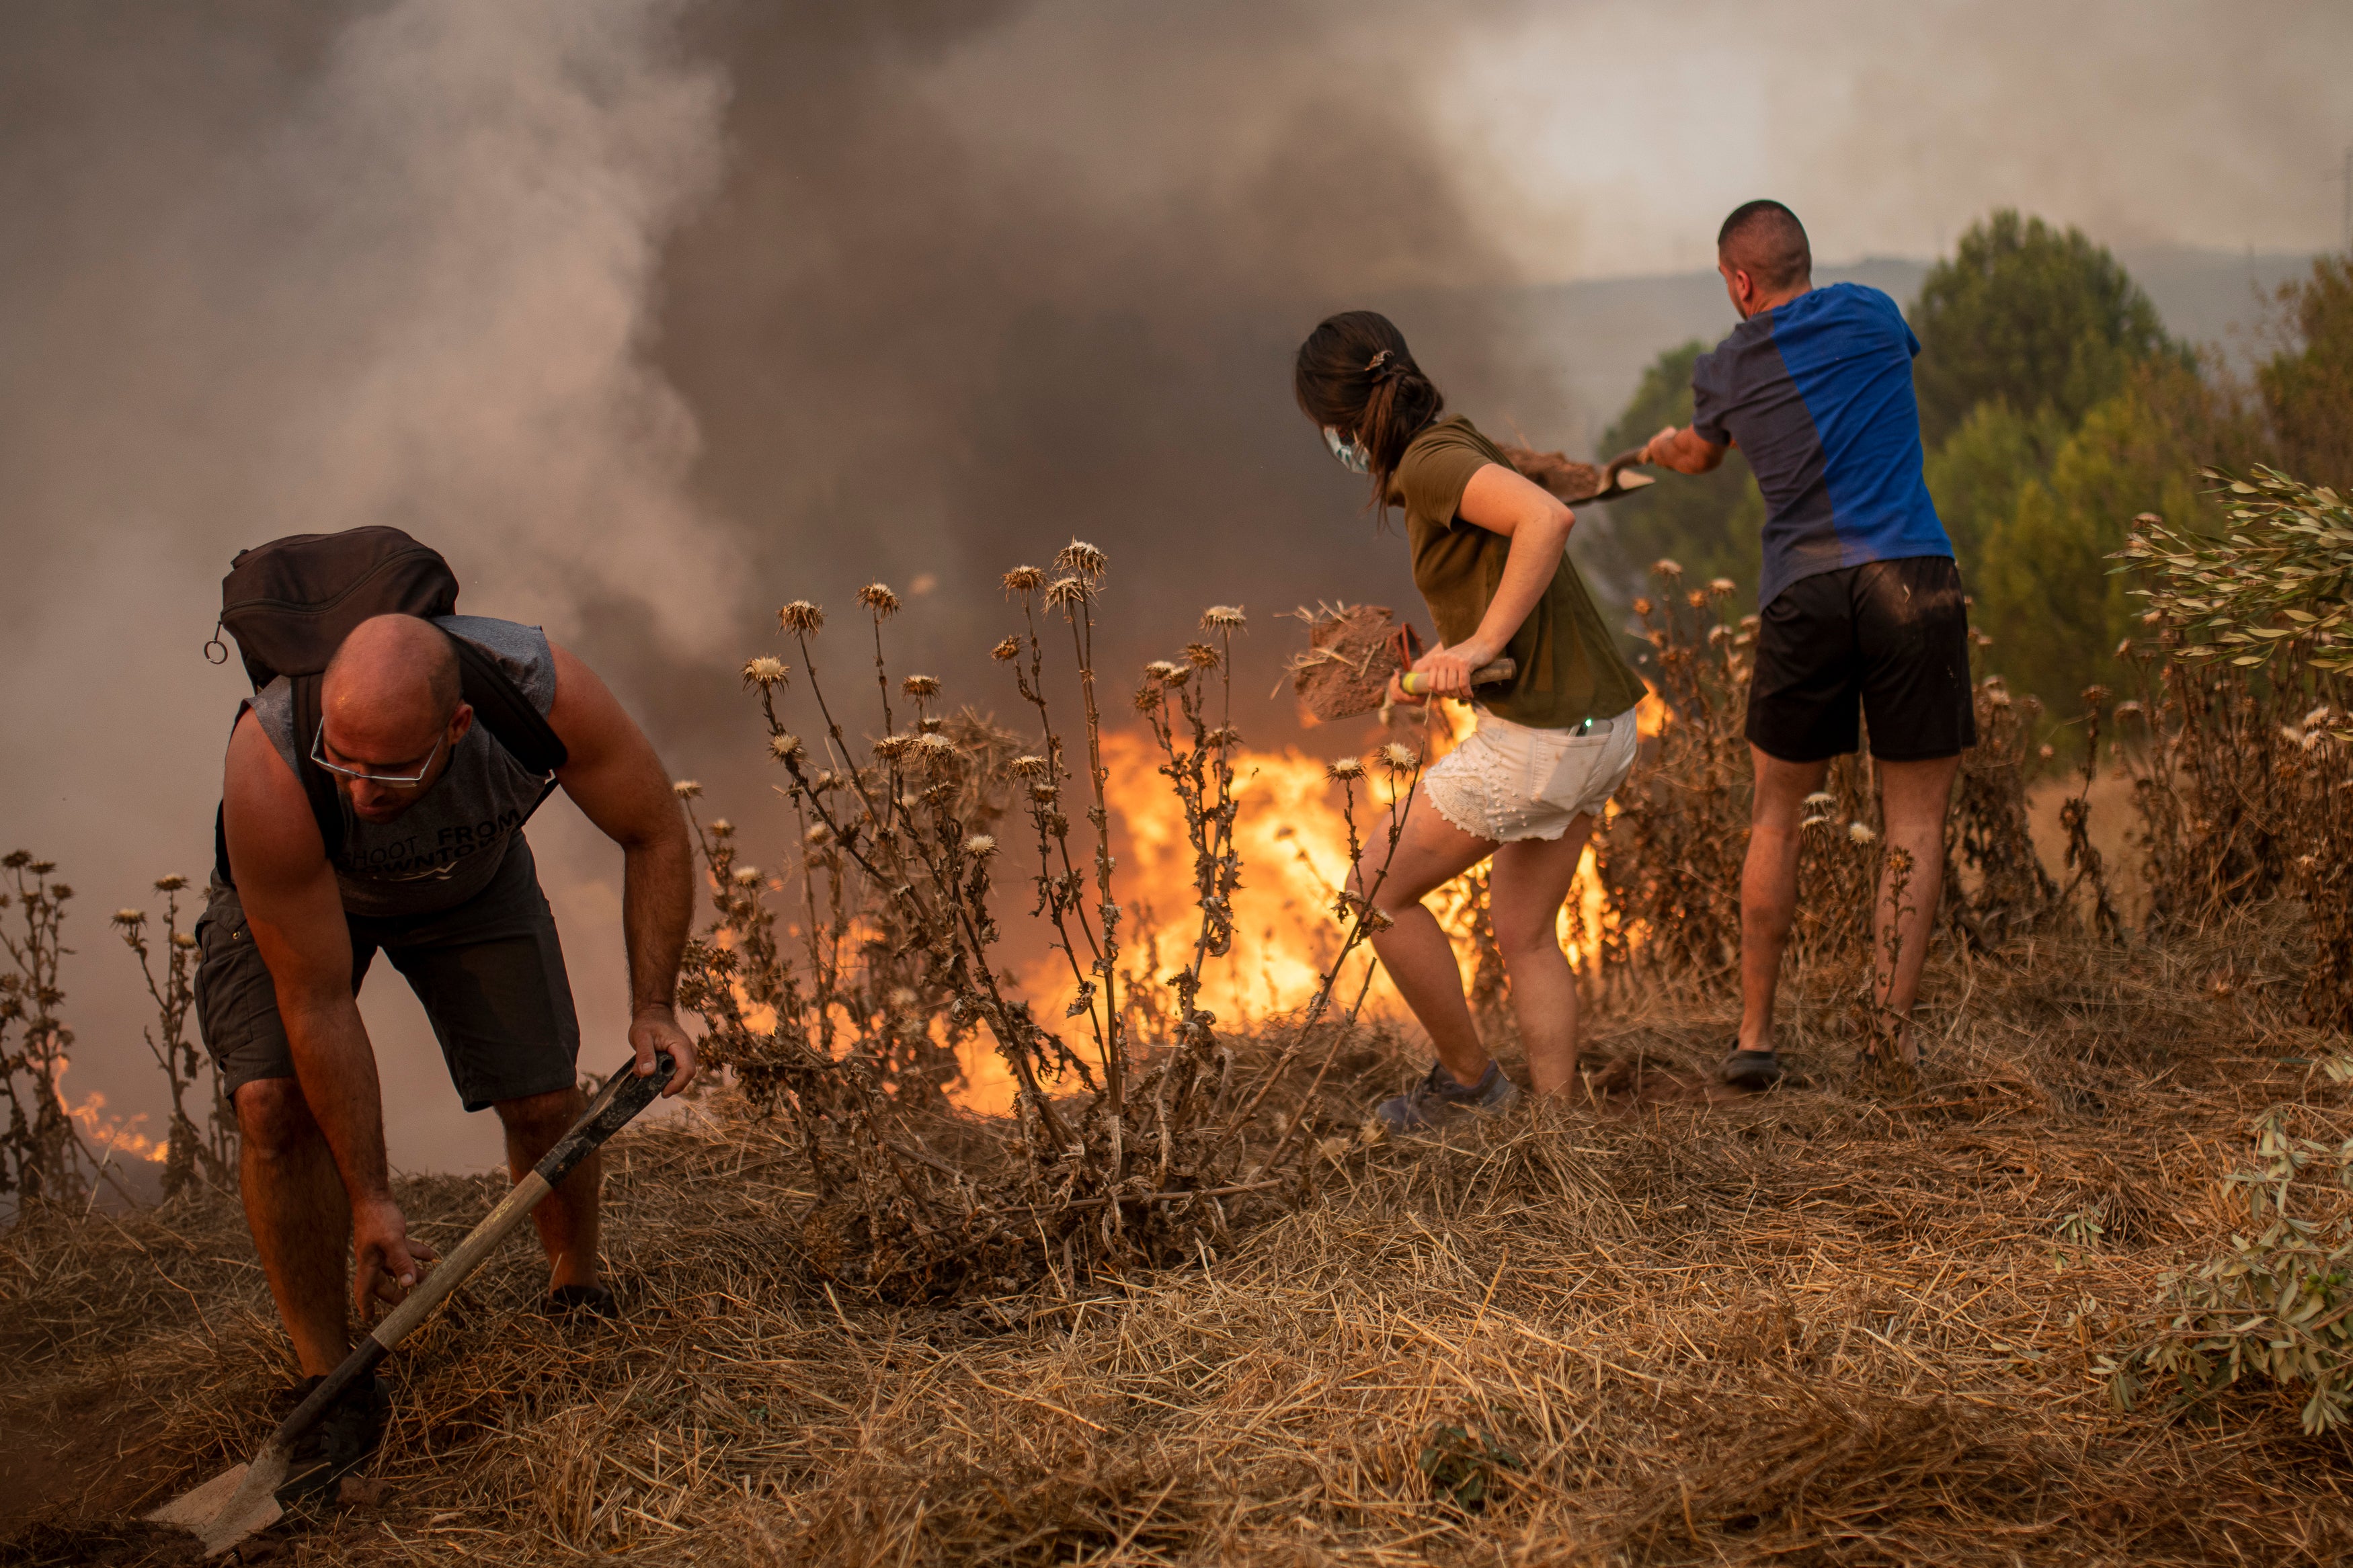 Residents of Sant Fruitós del Bages, Catalonia, Spain work together to extinguish a wildfire on July 17, 2022. (Photo: Lorena Sopêna / Europa Press, AP)